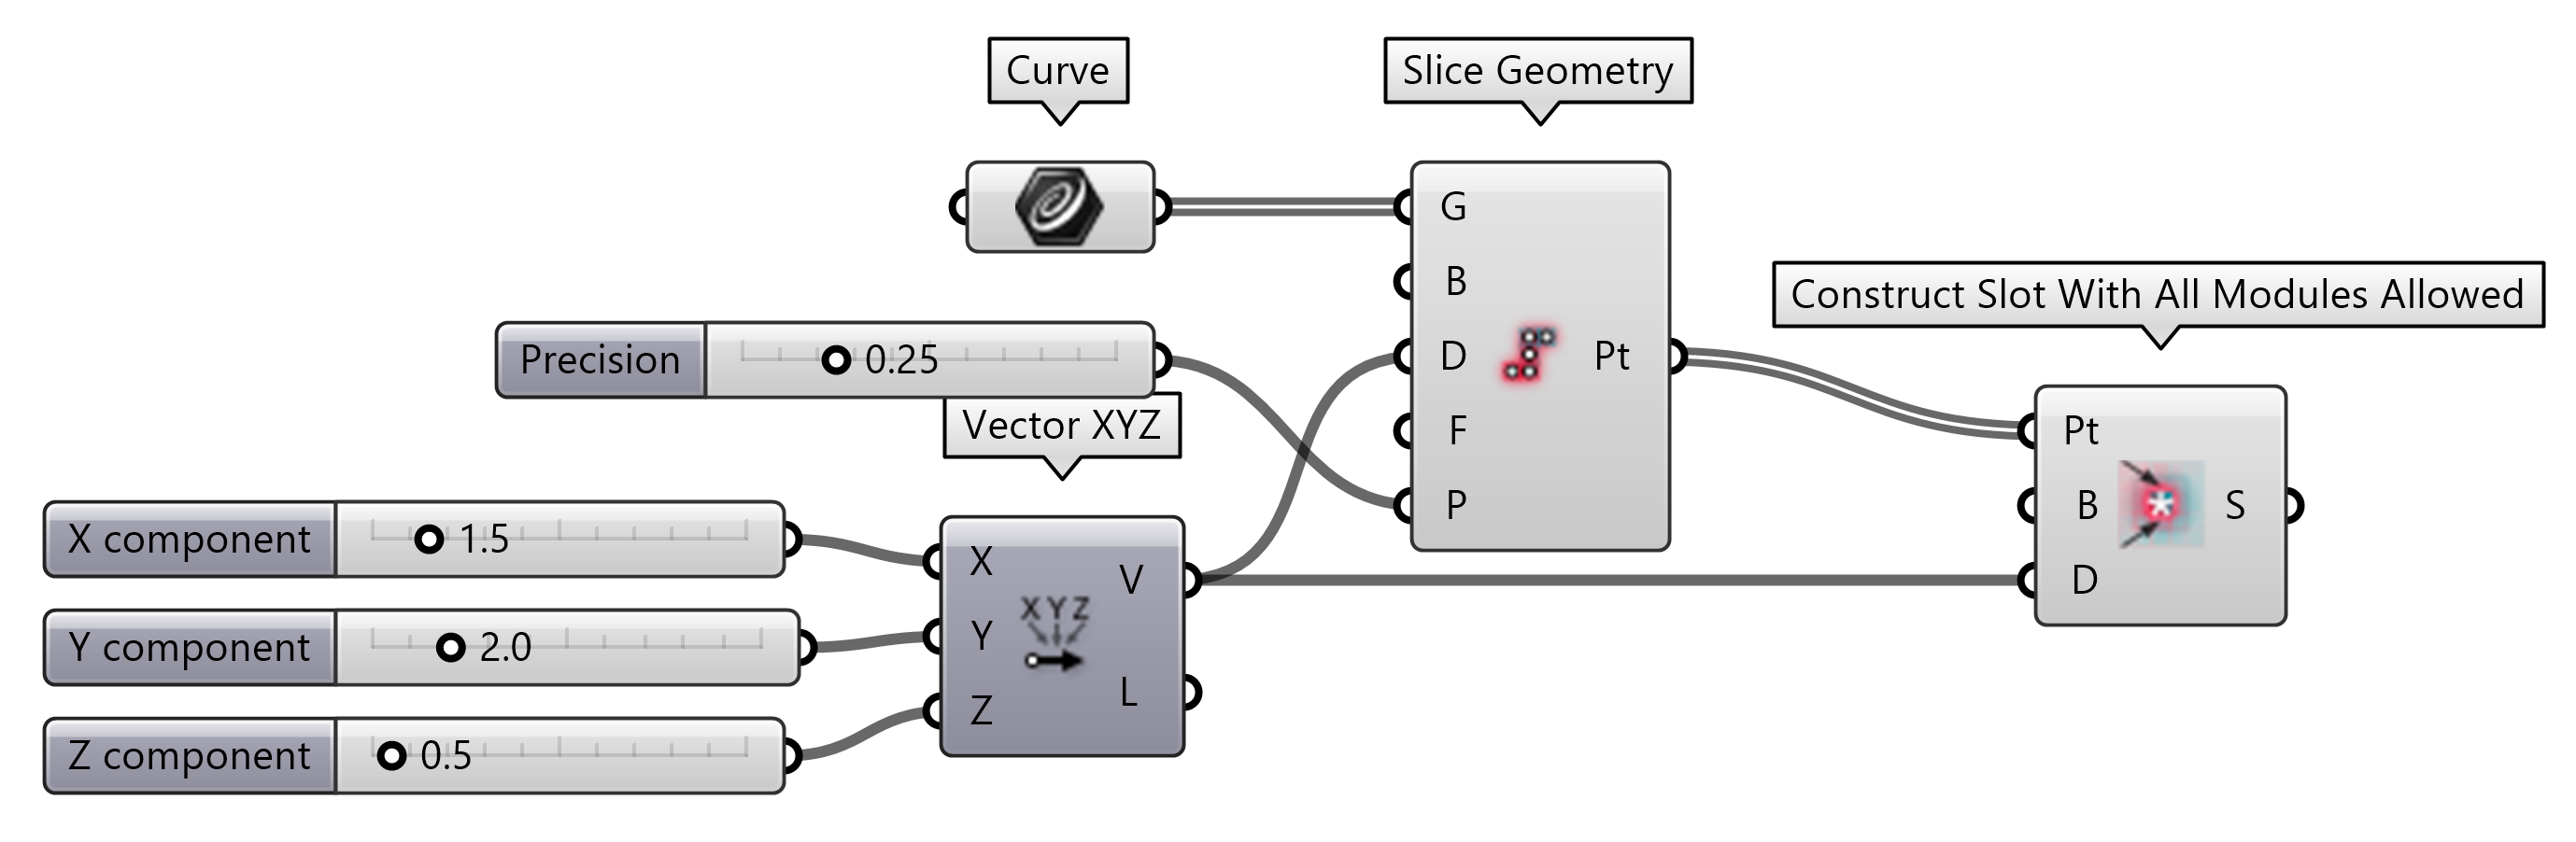 Slots from Slice Geometry: Curves